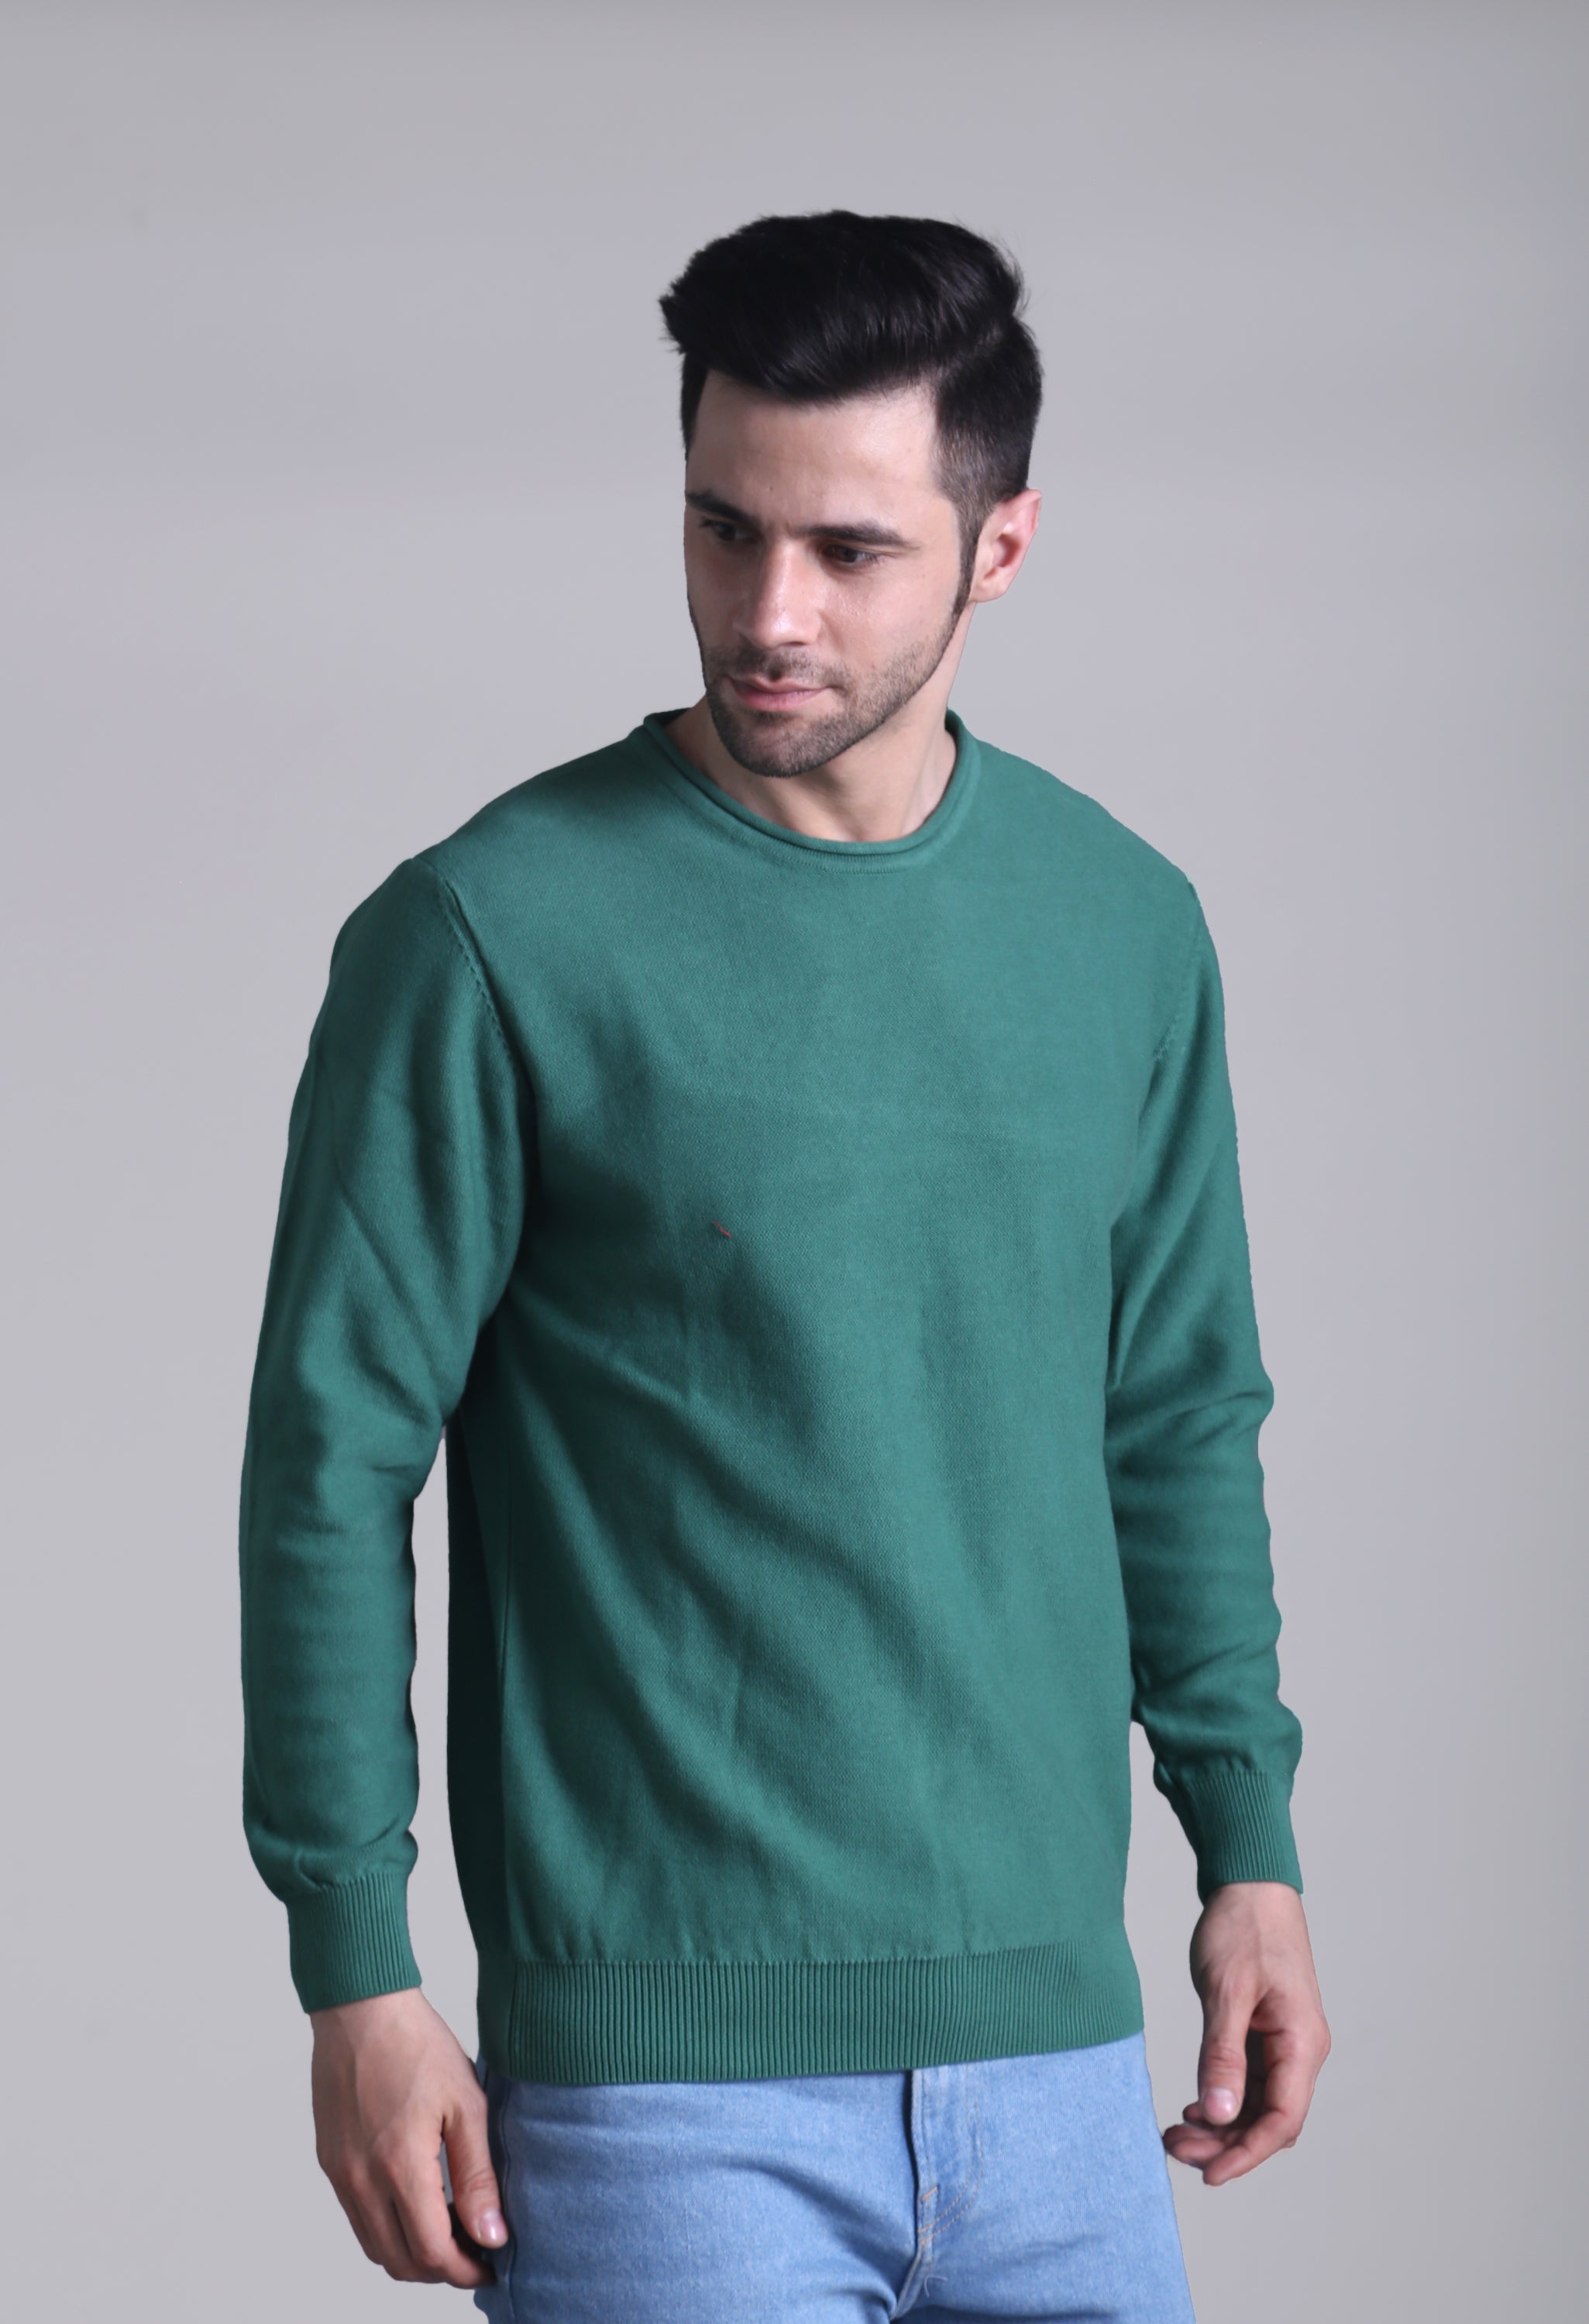 Solid Plane Green Sweater - SQUIREHOOD